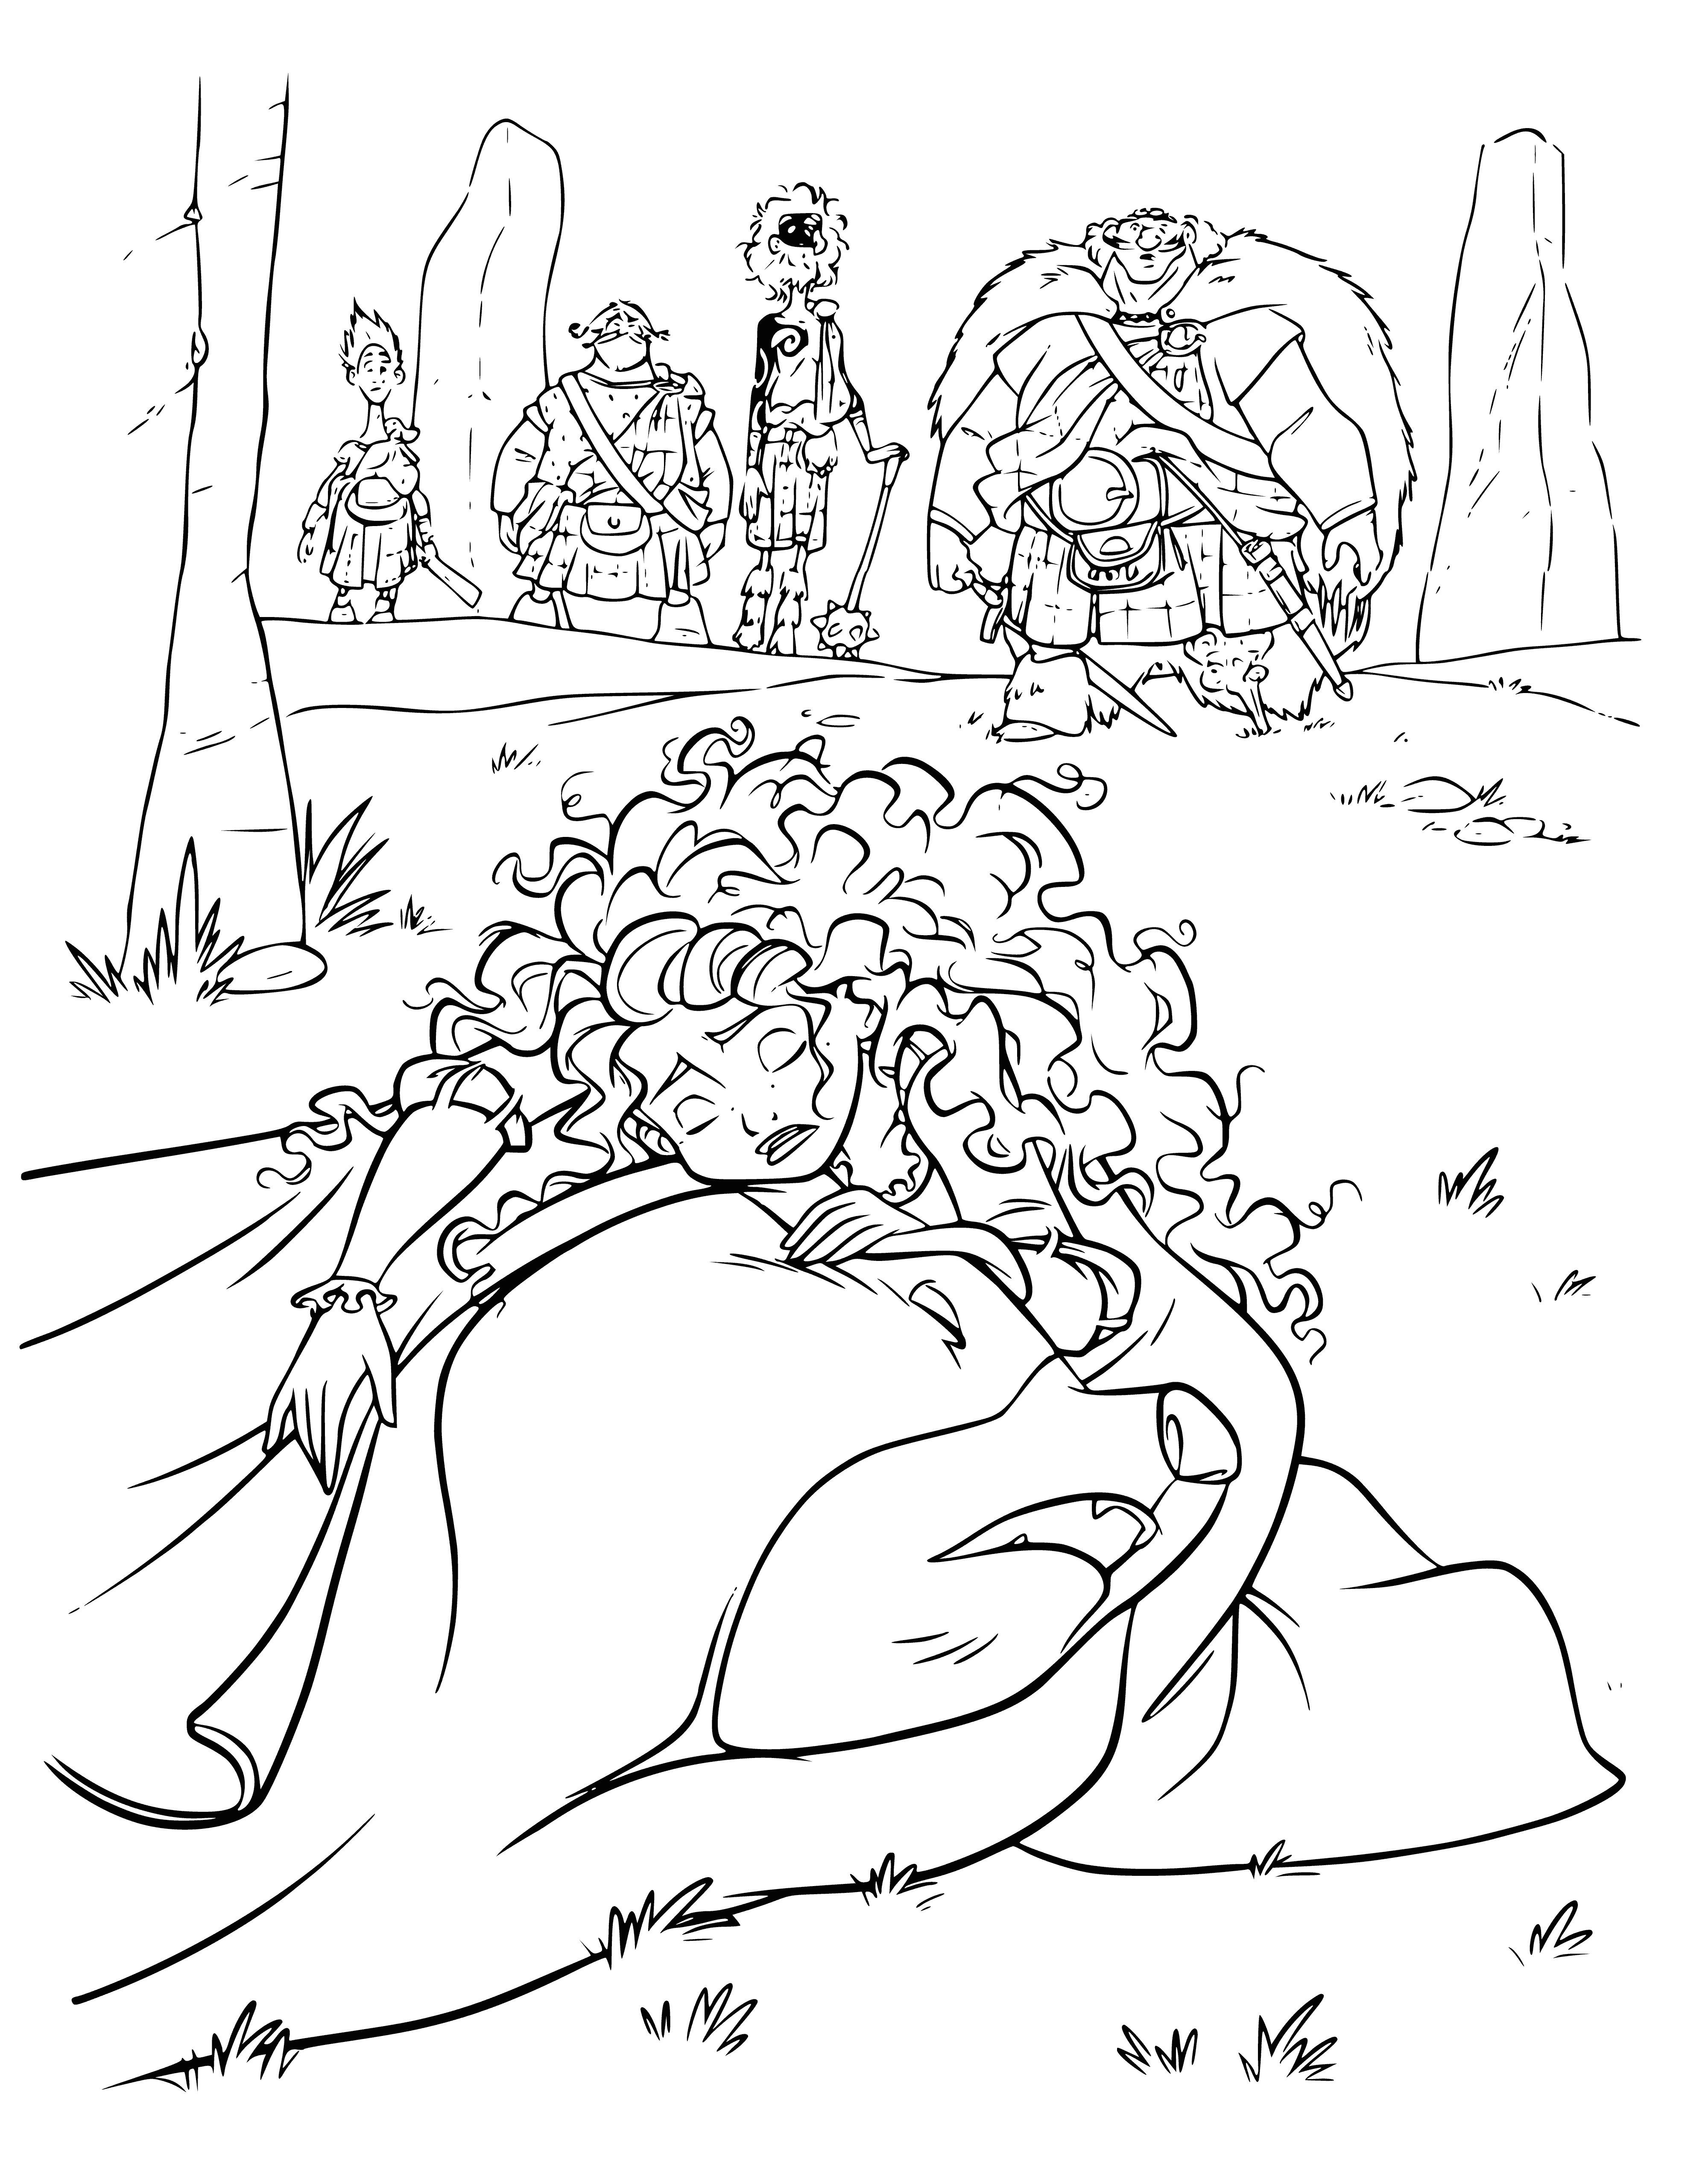 coloring page: Merida covers bear with tapestry featuring knight battling dragon with sword & shield; dragon roaring, smoke from nostrils.